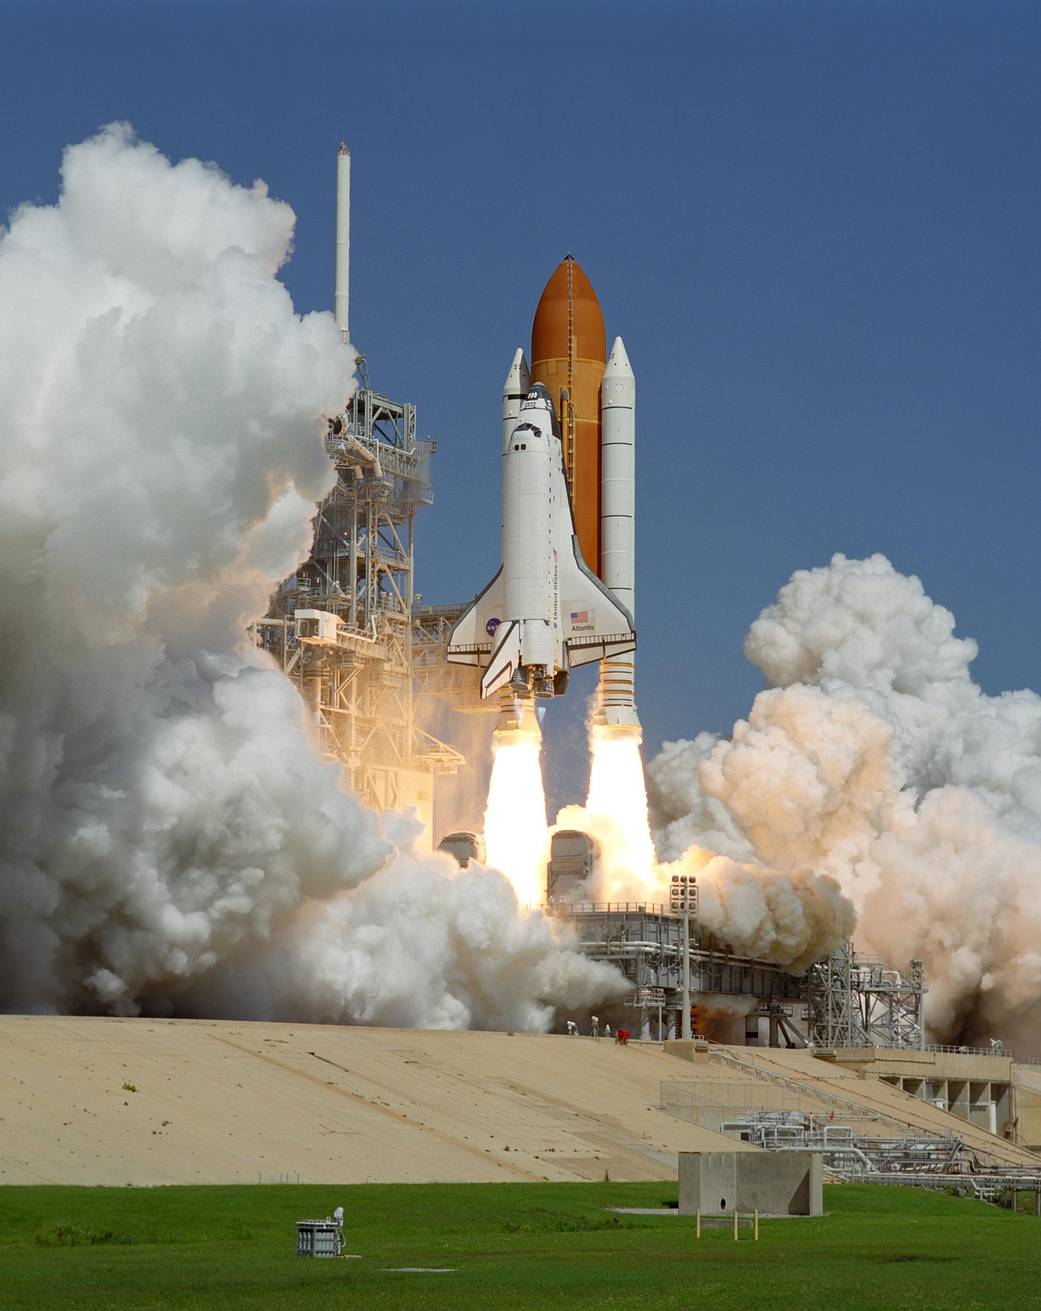 This week in 2000, space shuttle Atlantis, mission STS-115, launched from the Kennedy Space Center on the 19th flight to the ISS